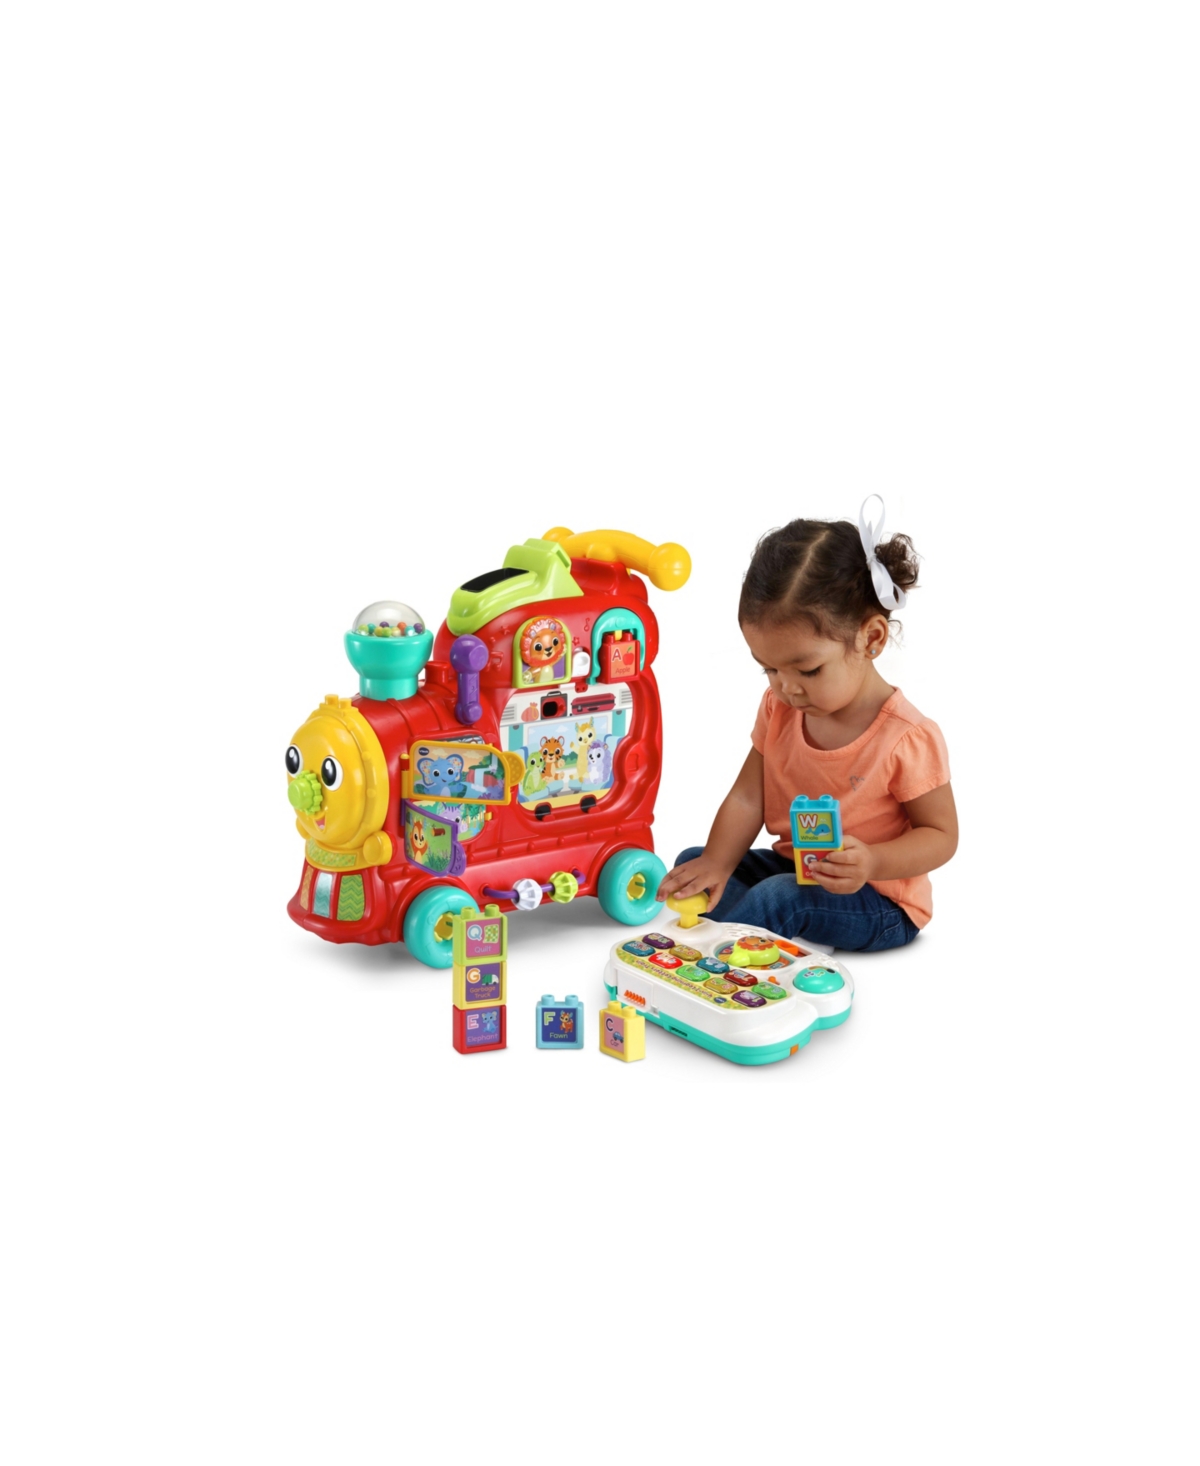 Shop Vtech 4-in-1 Learning Letters Train In Multi Color